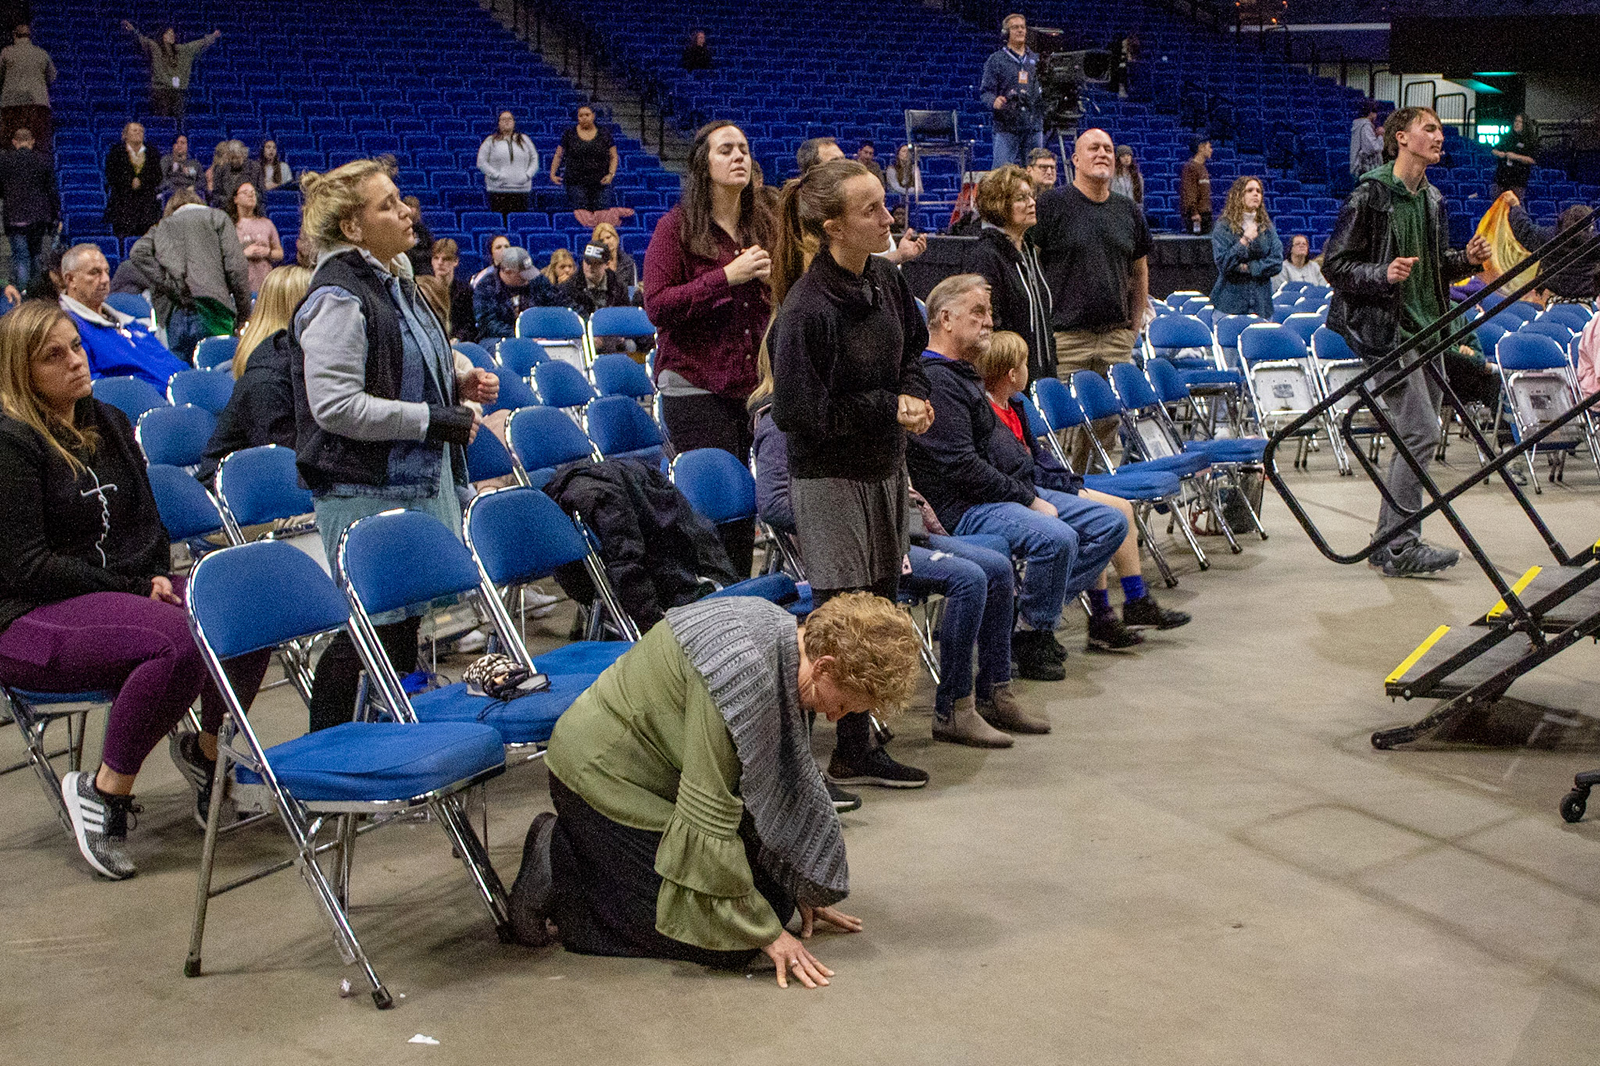 People attend a revival event at Rupp Arena in Lexington, Kentucky, Sunday, Feb. 26, 2023. Photo by Fiona Morgan